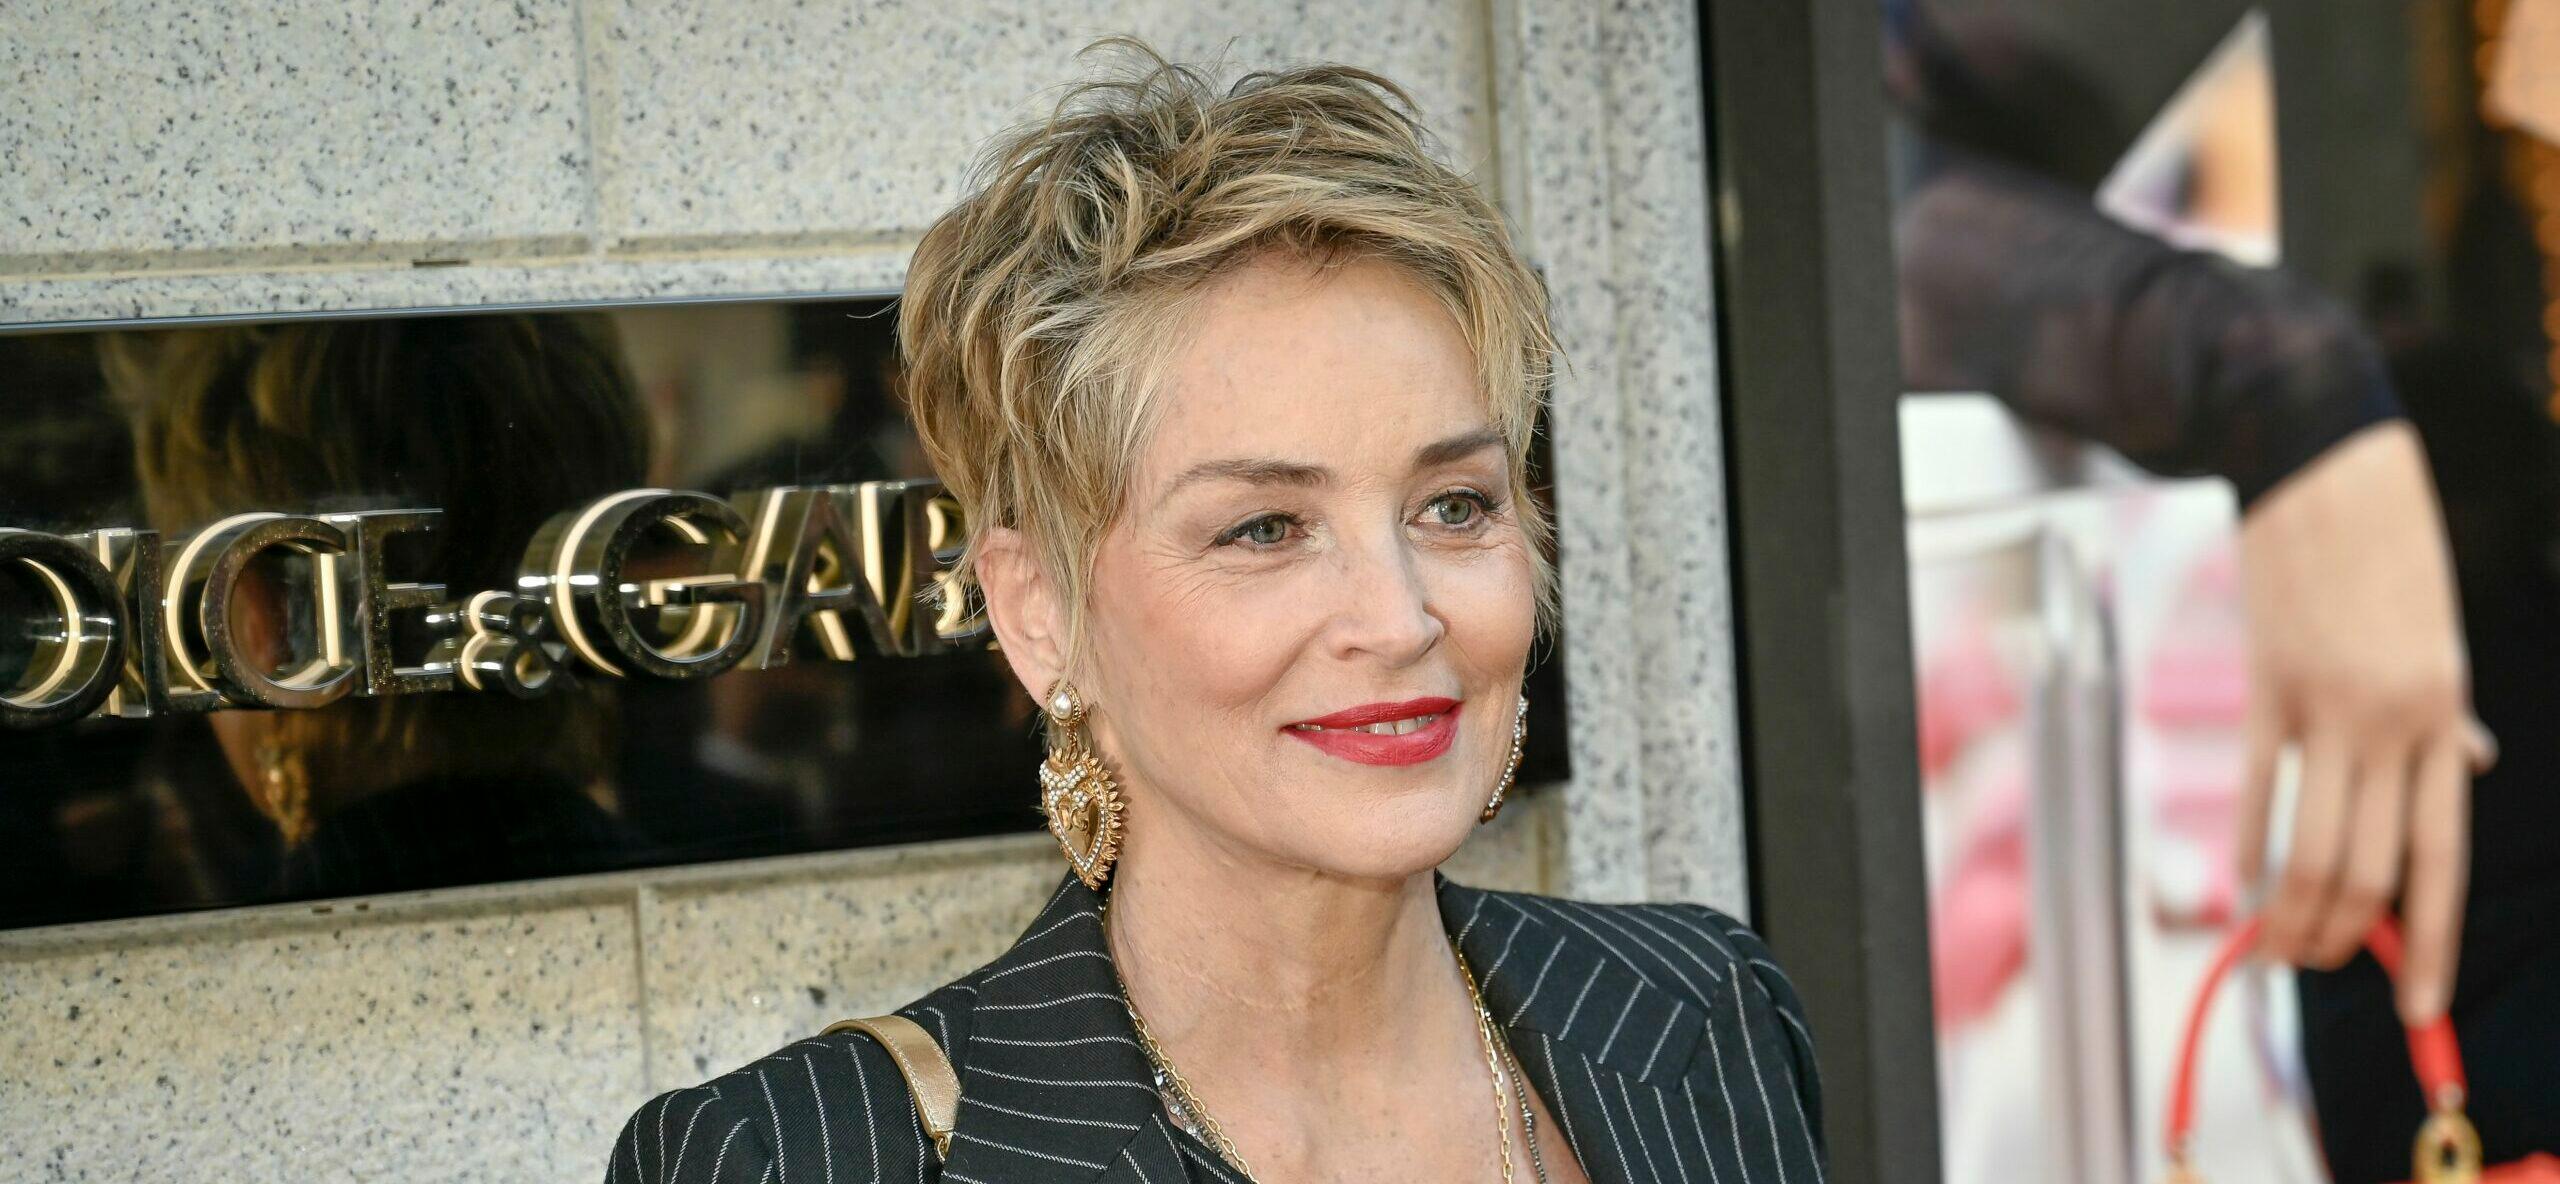 Sharon Stone Tearfully Reveals She ‘Lost Half’ Of Her Money In The Silicon Valley Bank Collapse